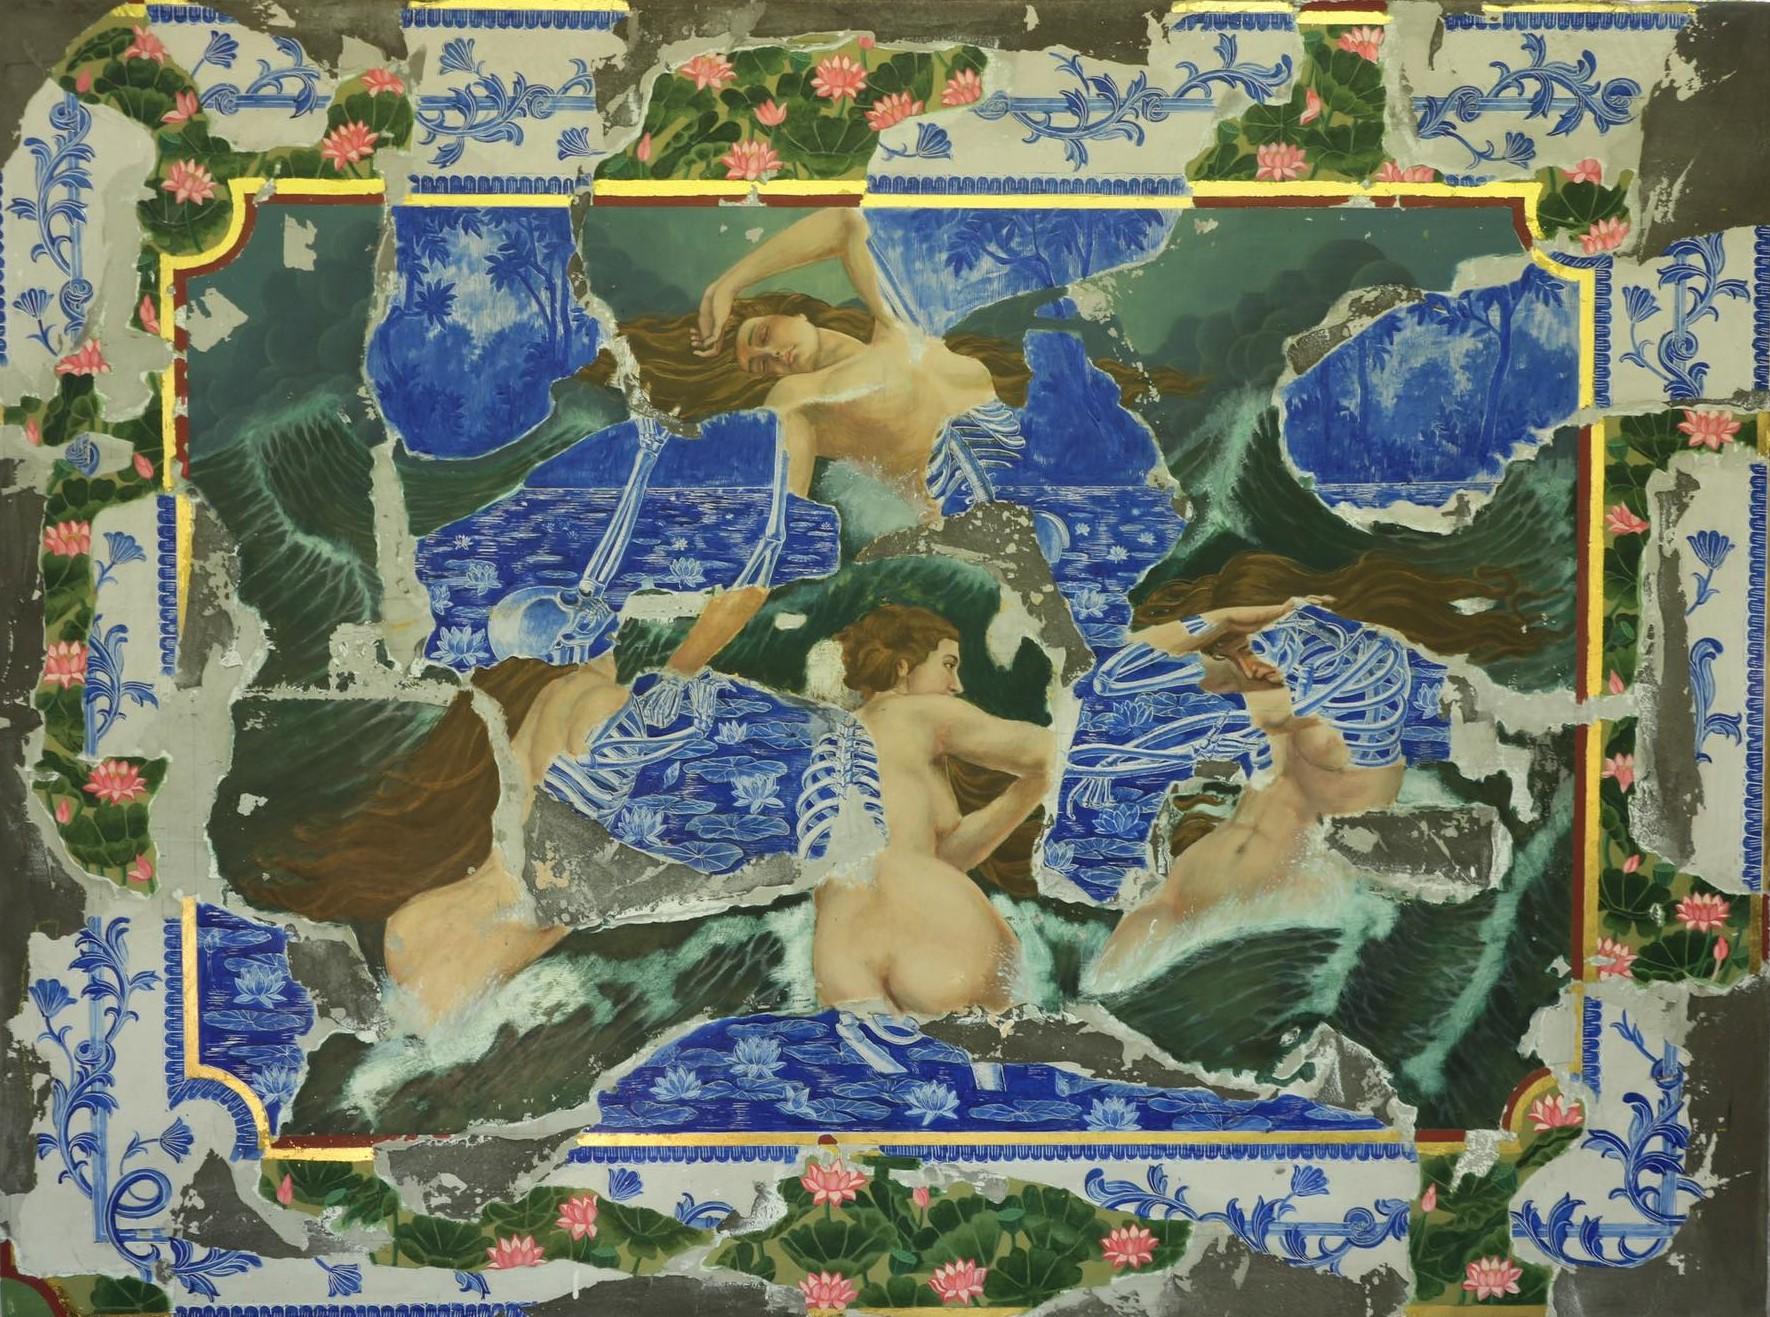 Dance in the Lotus Pond - Mixed Media Art by Pannaphan Yodmanee